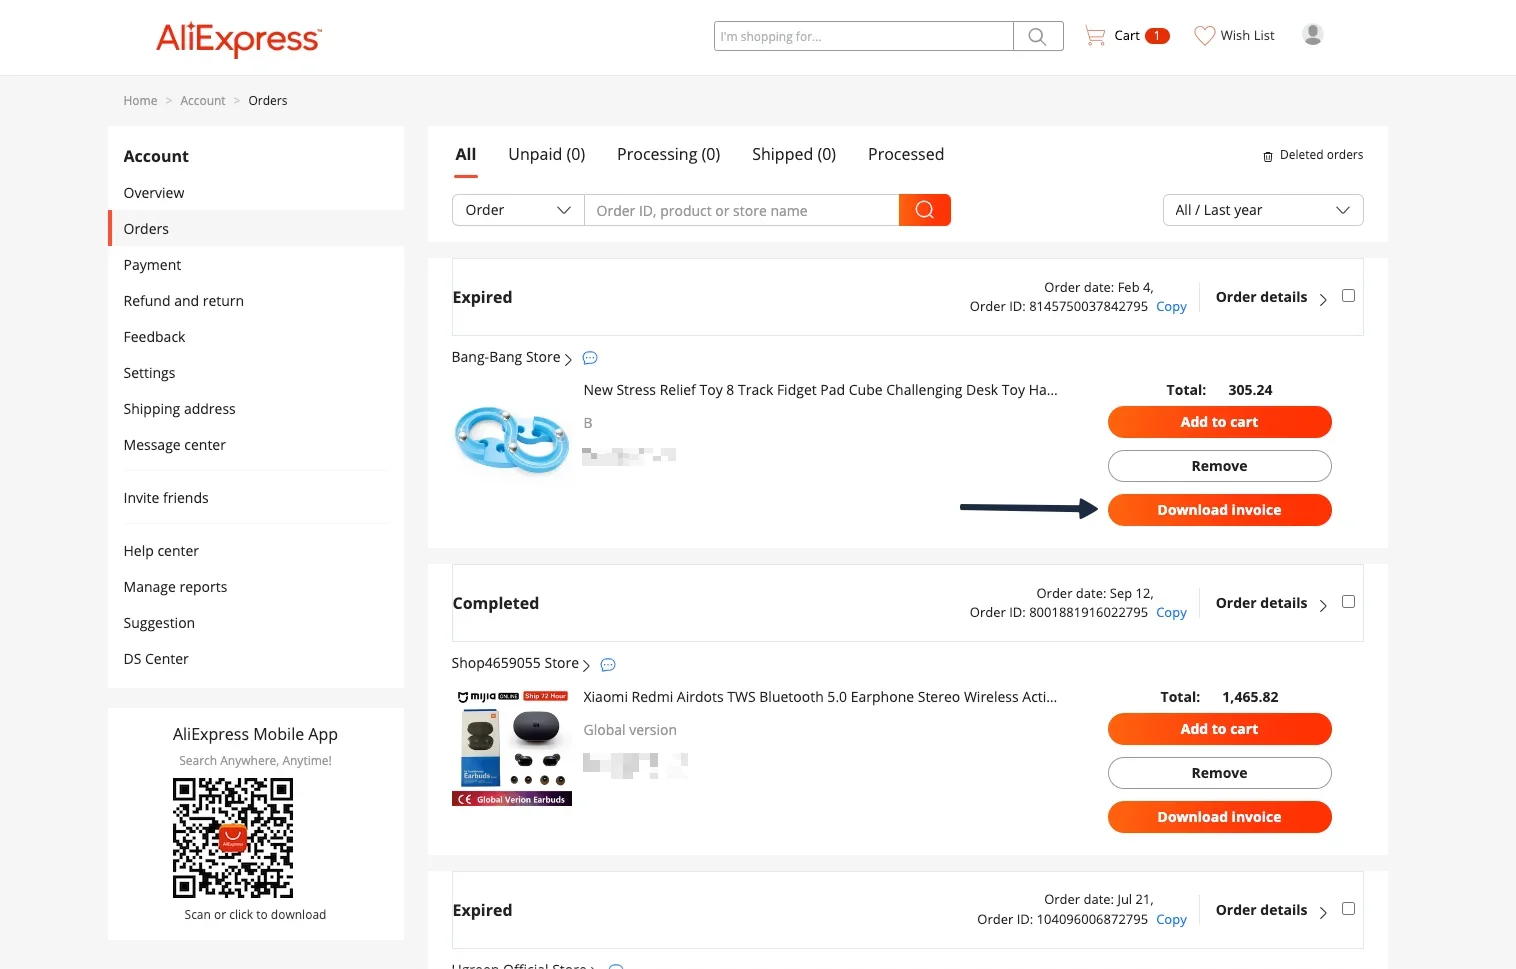 AliExpress orders page